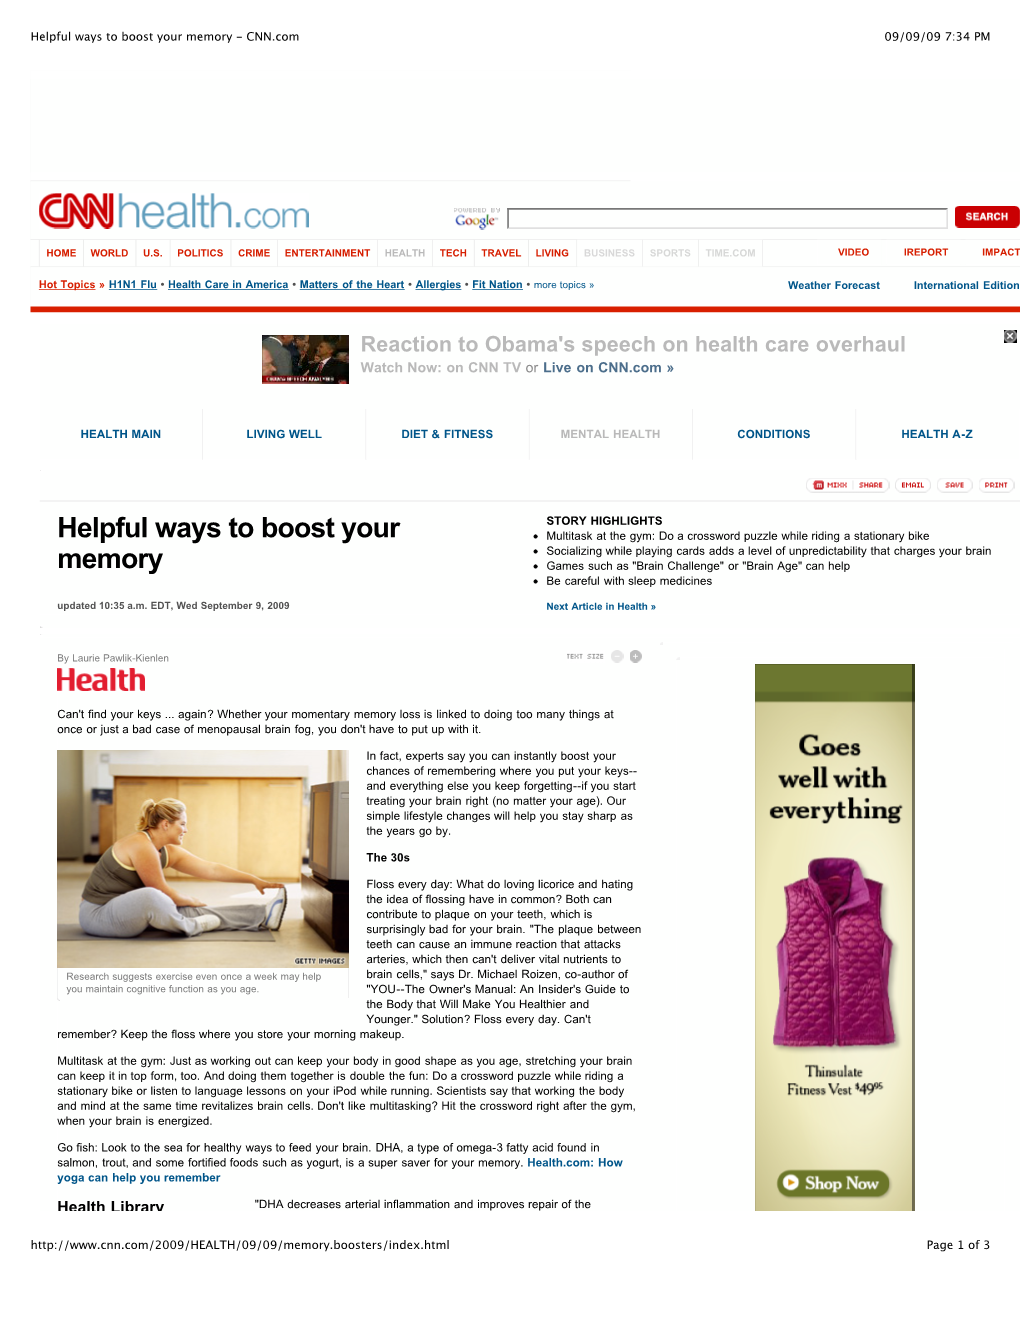 Helpful Ways to Boost Your Memory - CNN.Com 09/09/09 7:34 PM